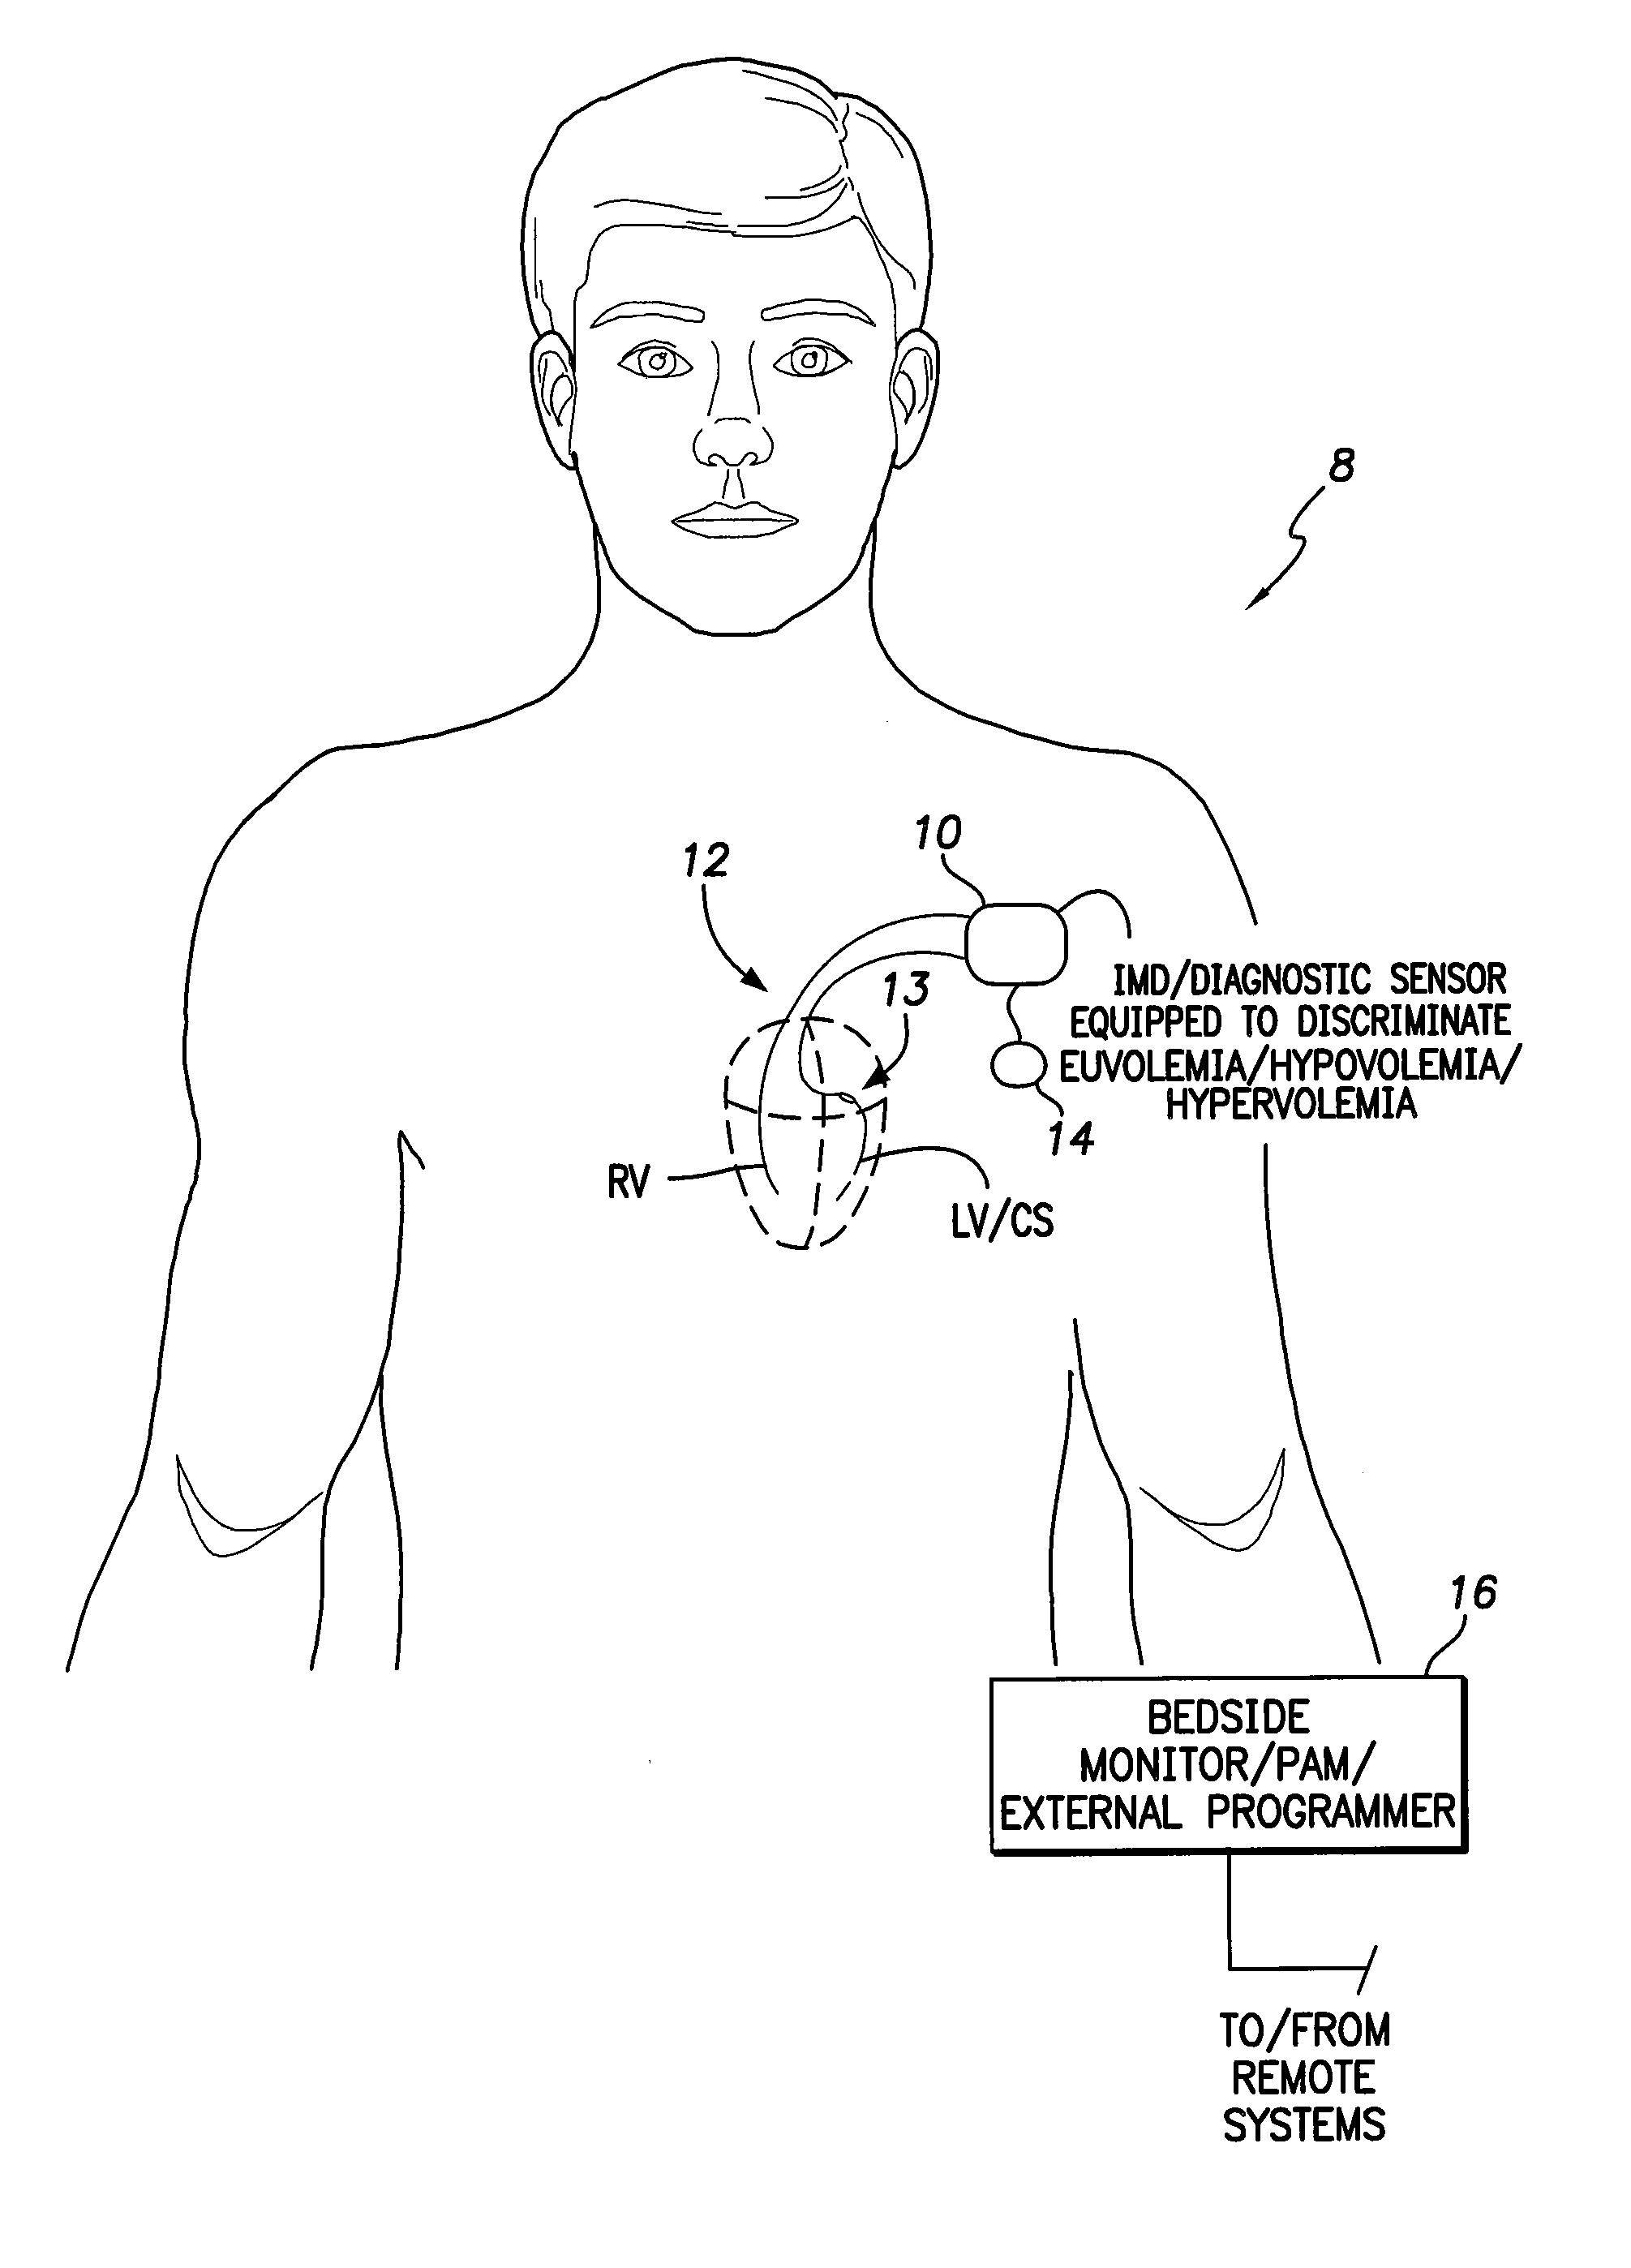 System and method for discriminating hypervolemia, hypovolemia and euvolemia using an implantable medical device